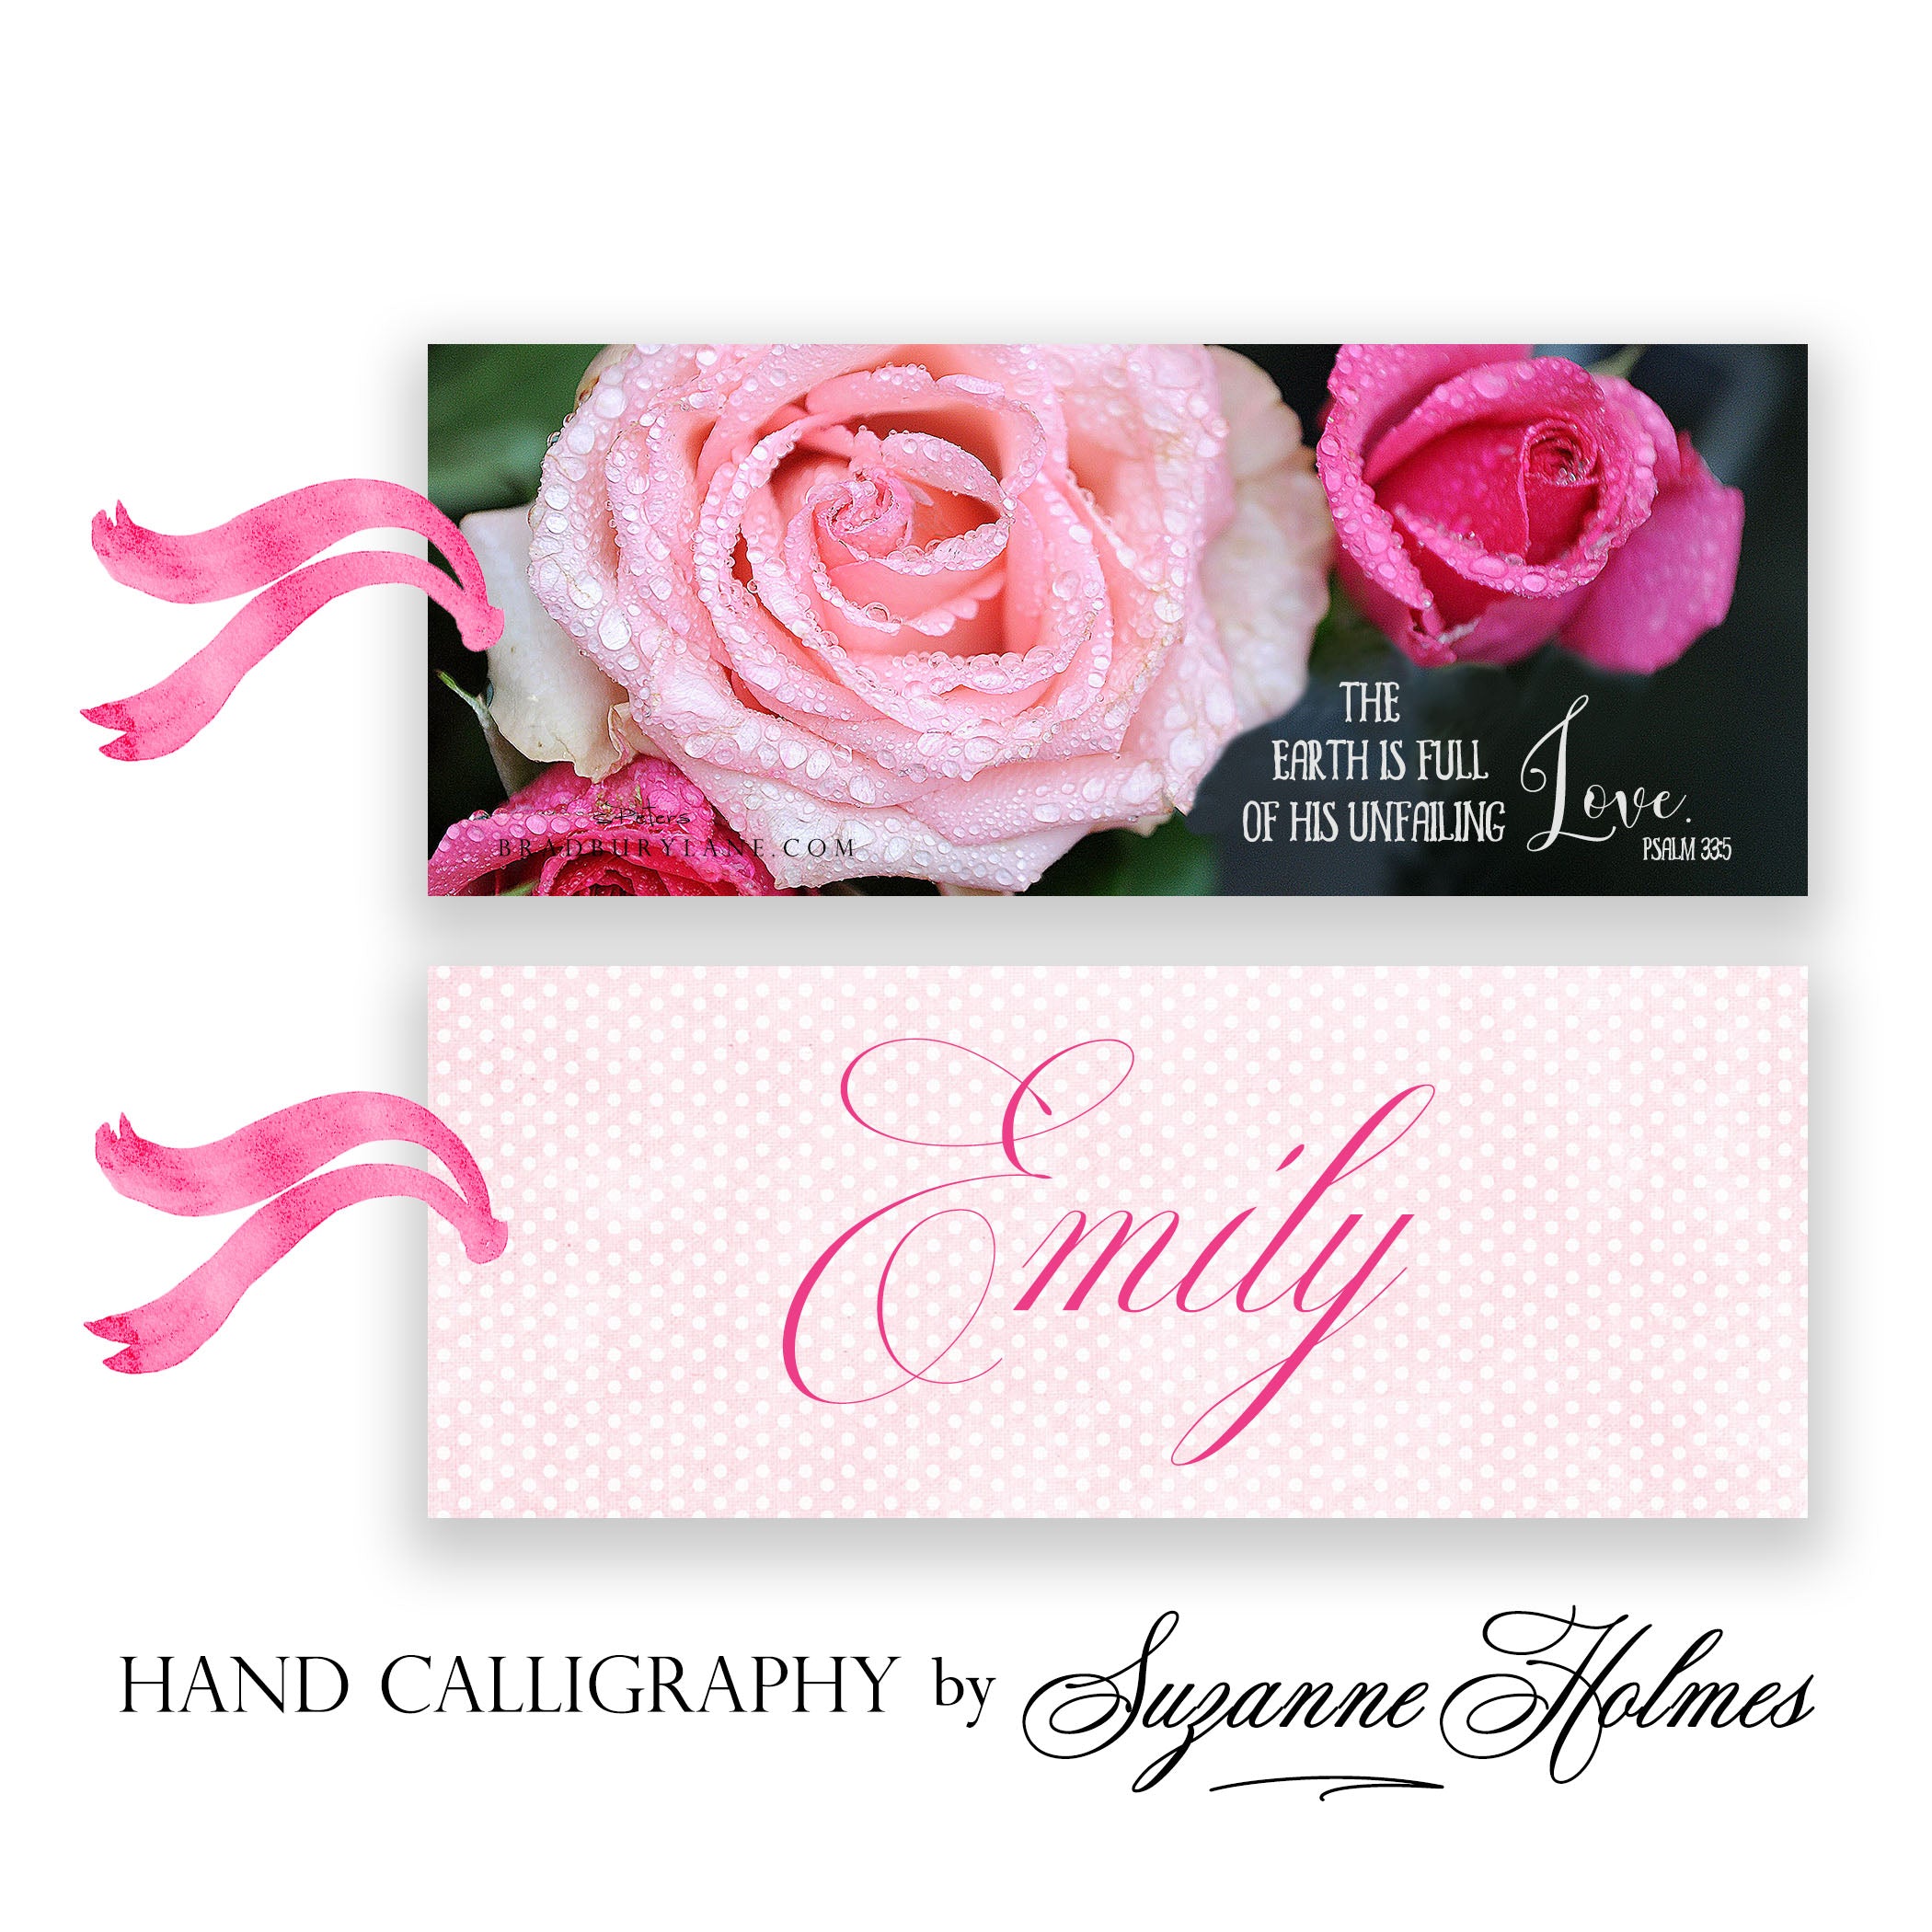 Raindrops on Roses (Psalm 33:5) - Personalized Bookmark